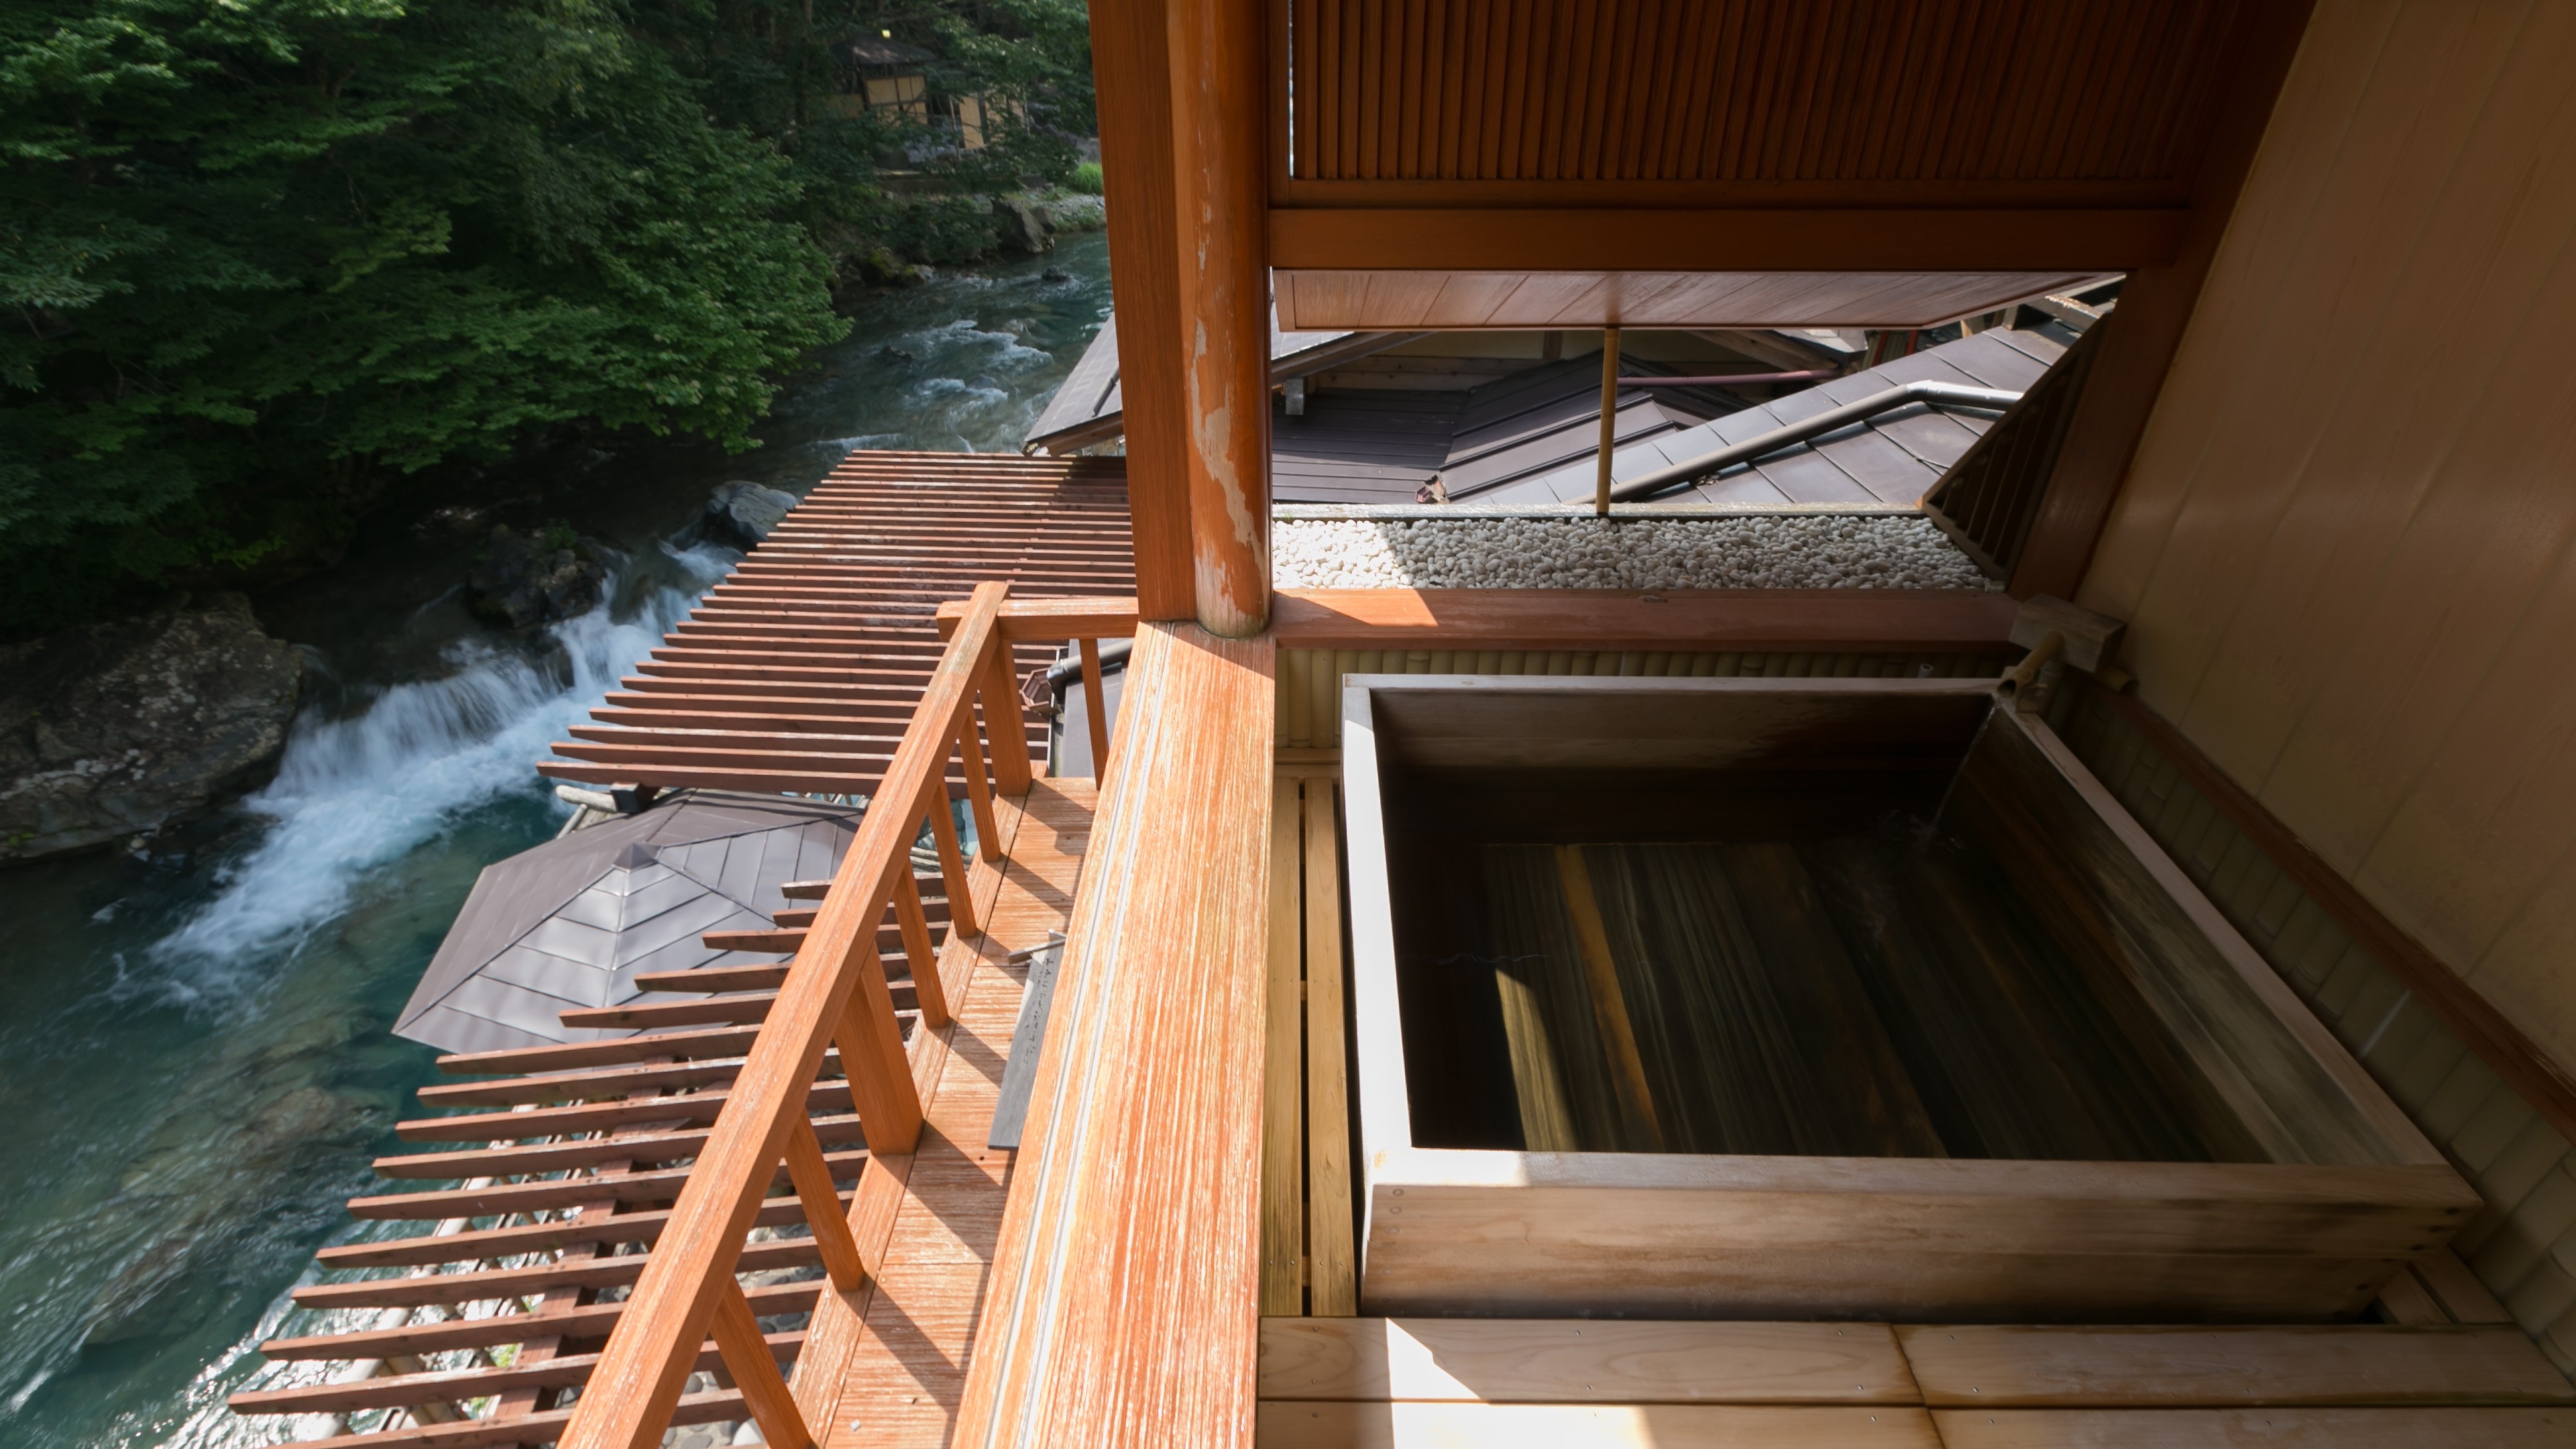 ・ A powerful view of Adonis ramosa and Shima River. Guest room with open-air bath flowing from the source